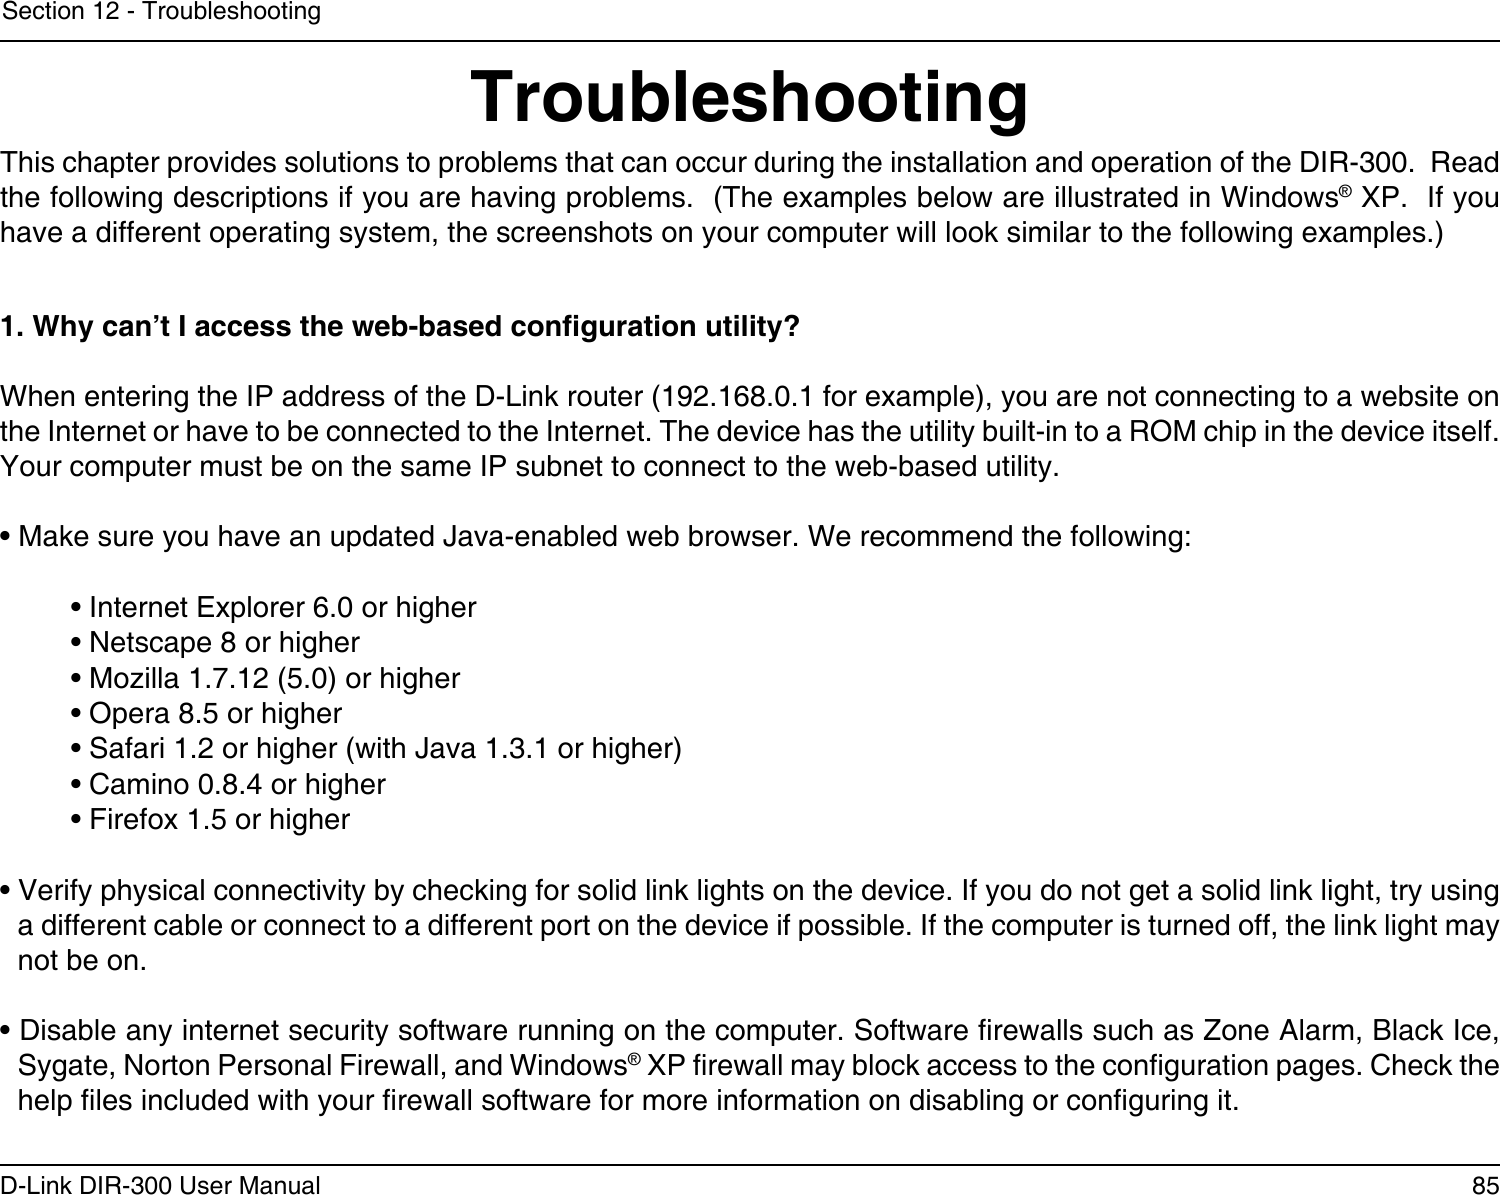 85D-Link DIR-300 User ManualSection 12 - TroubleshootingTroubleshootingThis chapter provides solutions to problems that can occur during the installation and operation of the DIR-300.  Read the following descriptions if you are having problems.  (The examples below are illustrated in Windows® XP.  If you have a different operating system, the screenshots on your computer will look similar to the following examples.)1. Why can’t I access the web-based conguration utility?When entering the IP address of the D-Link router (192.168.0.1 for example), you are not connecting to a website on the Internet or have to be connected to the Internet. The device has the utility built-in to a ROM chip in the device itself. Your computer must be on the same IP subnet to connect to the web-based utility. • Make sure you have an updated Java-enabled web browser. We recommend the following: • Internet Explorer 6.0 or higher • Netscape 8 or higher • Mozilla 1.7.12 (5.0) or higher • Opera 8.5 or higher • Safari 1.2 or higher (with Java 1.3.1 or higher) • Camino 0.8.4 or higher • Firefox 1.5 or higher • Verify physical connectivity by checking for solid link lights on the device. If you do not get a solid link light, try using a different cable or connect to a different port on the device if possible. If the computer is turned off, the link light may not be on.• Disable any internet security software running on the computer. Software rewalls such as Zone Alarm, Black Ice, Sygate, Norton Personal Firewall, and Windows® XP rewall may block access to the conguration pages. Check the help les included with your rewall software for more information on disabling or conguring it.